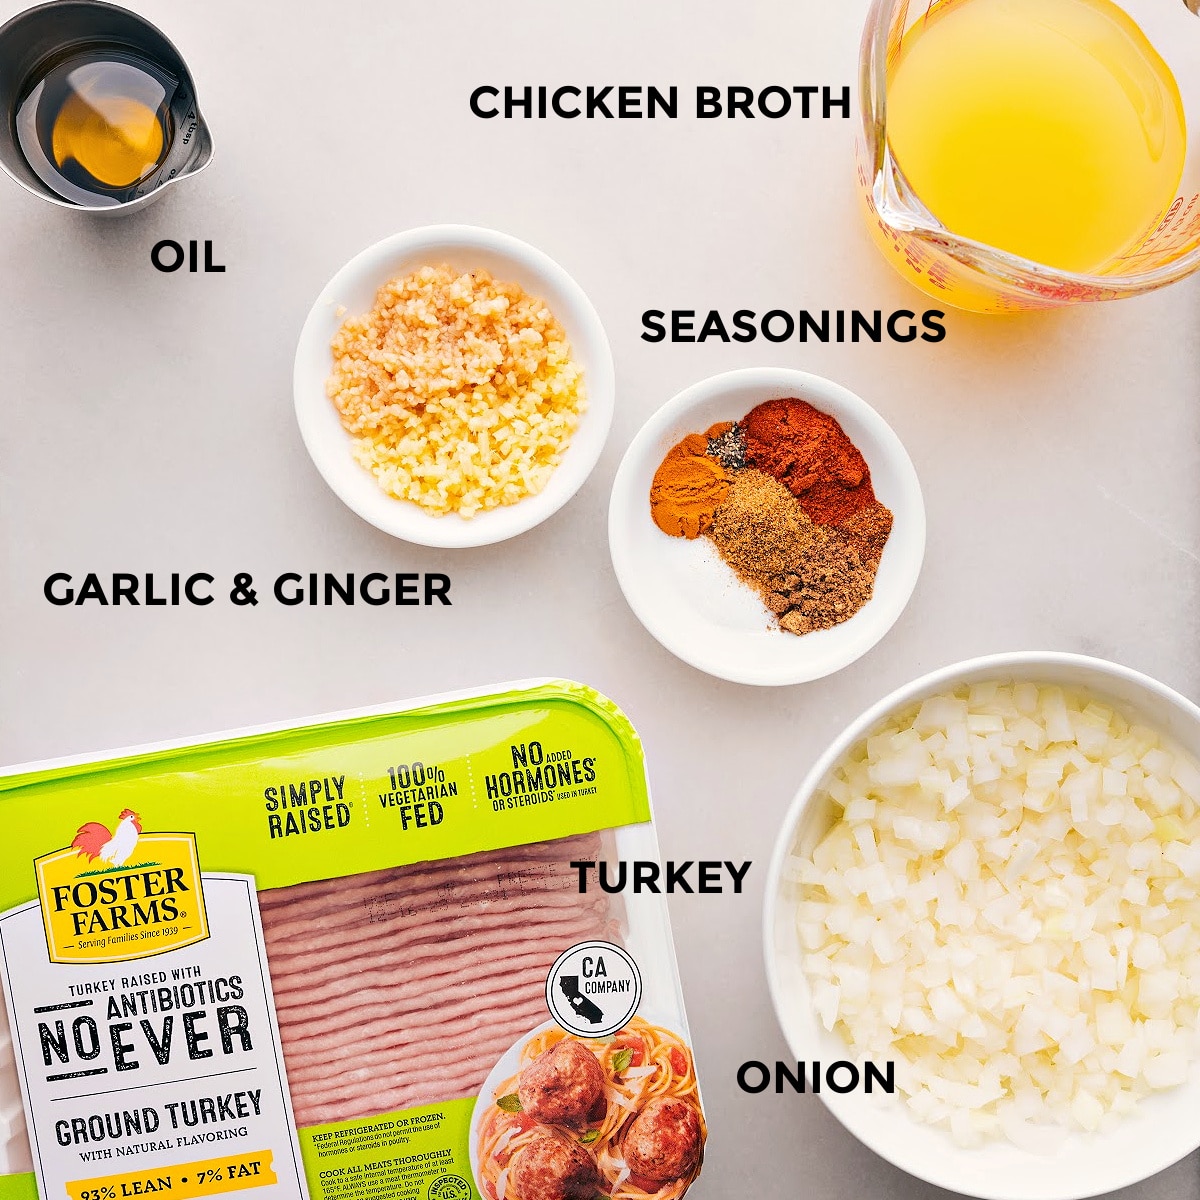 An array of ingredients used in this recipe, including the meat, chicken broth, chopped onions, various seasonings, and more, ready to be combined into a flavorful meal.